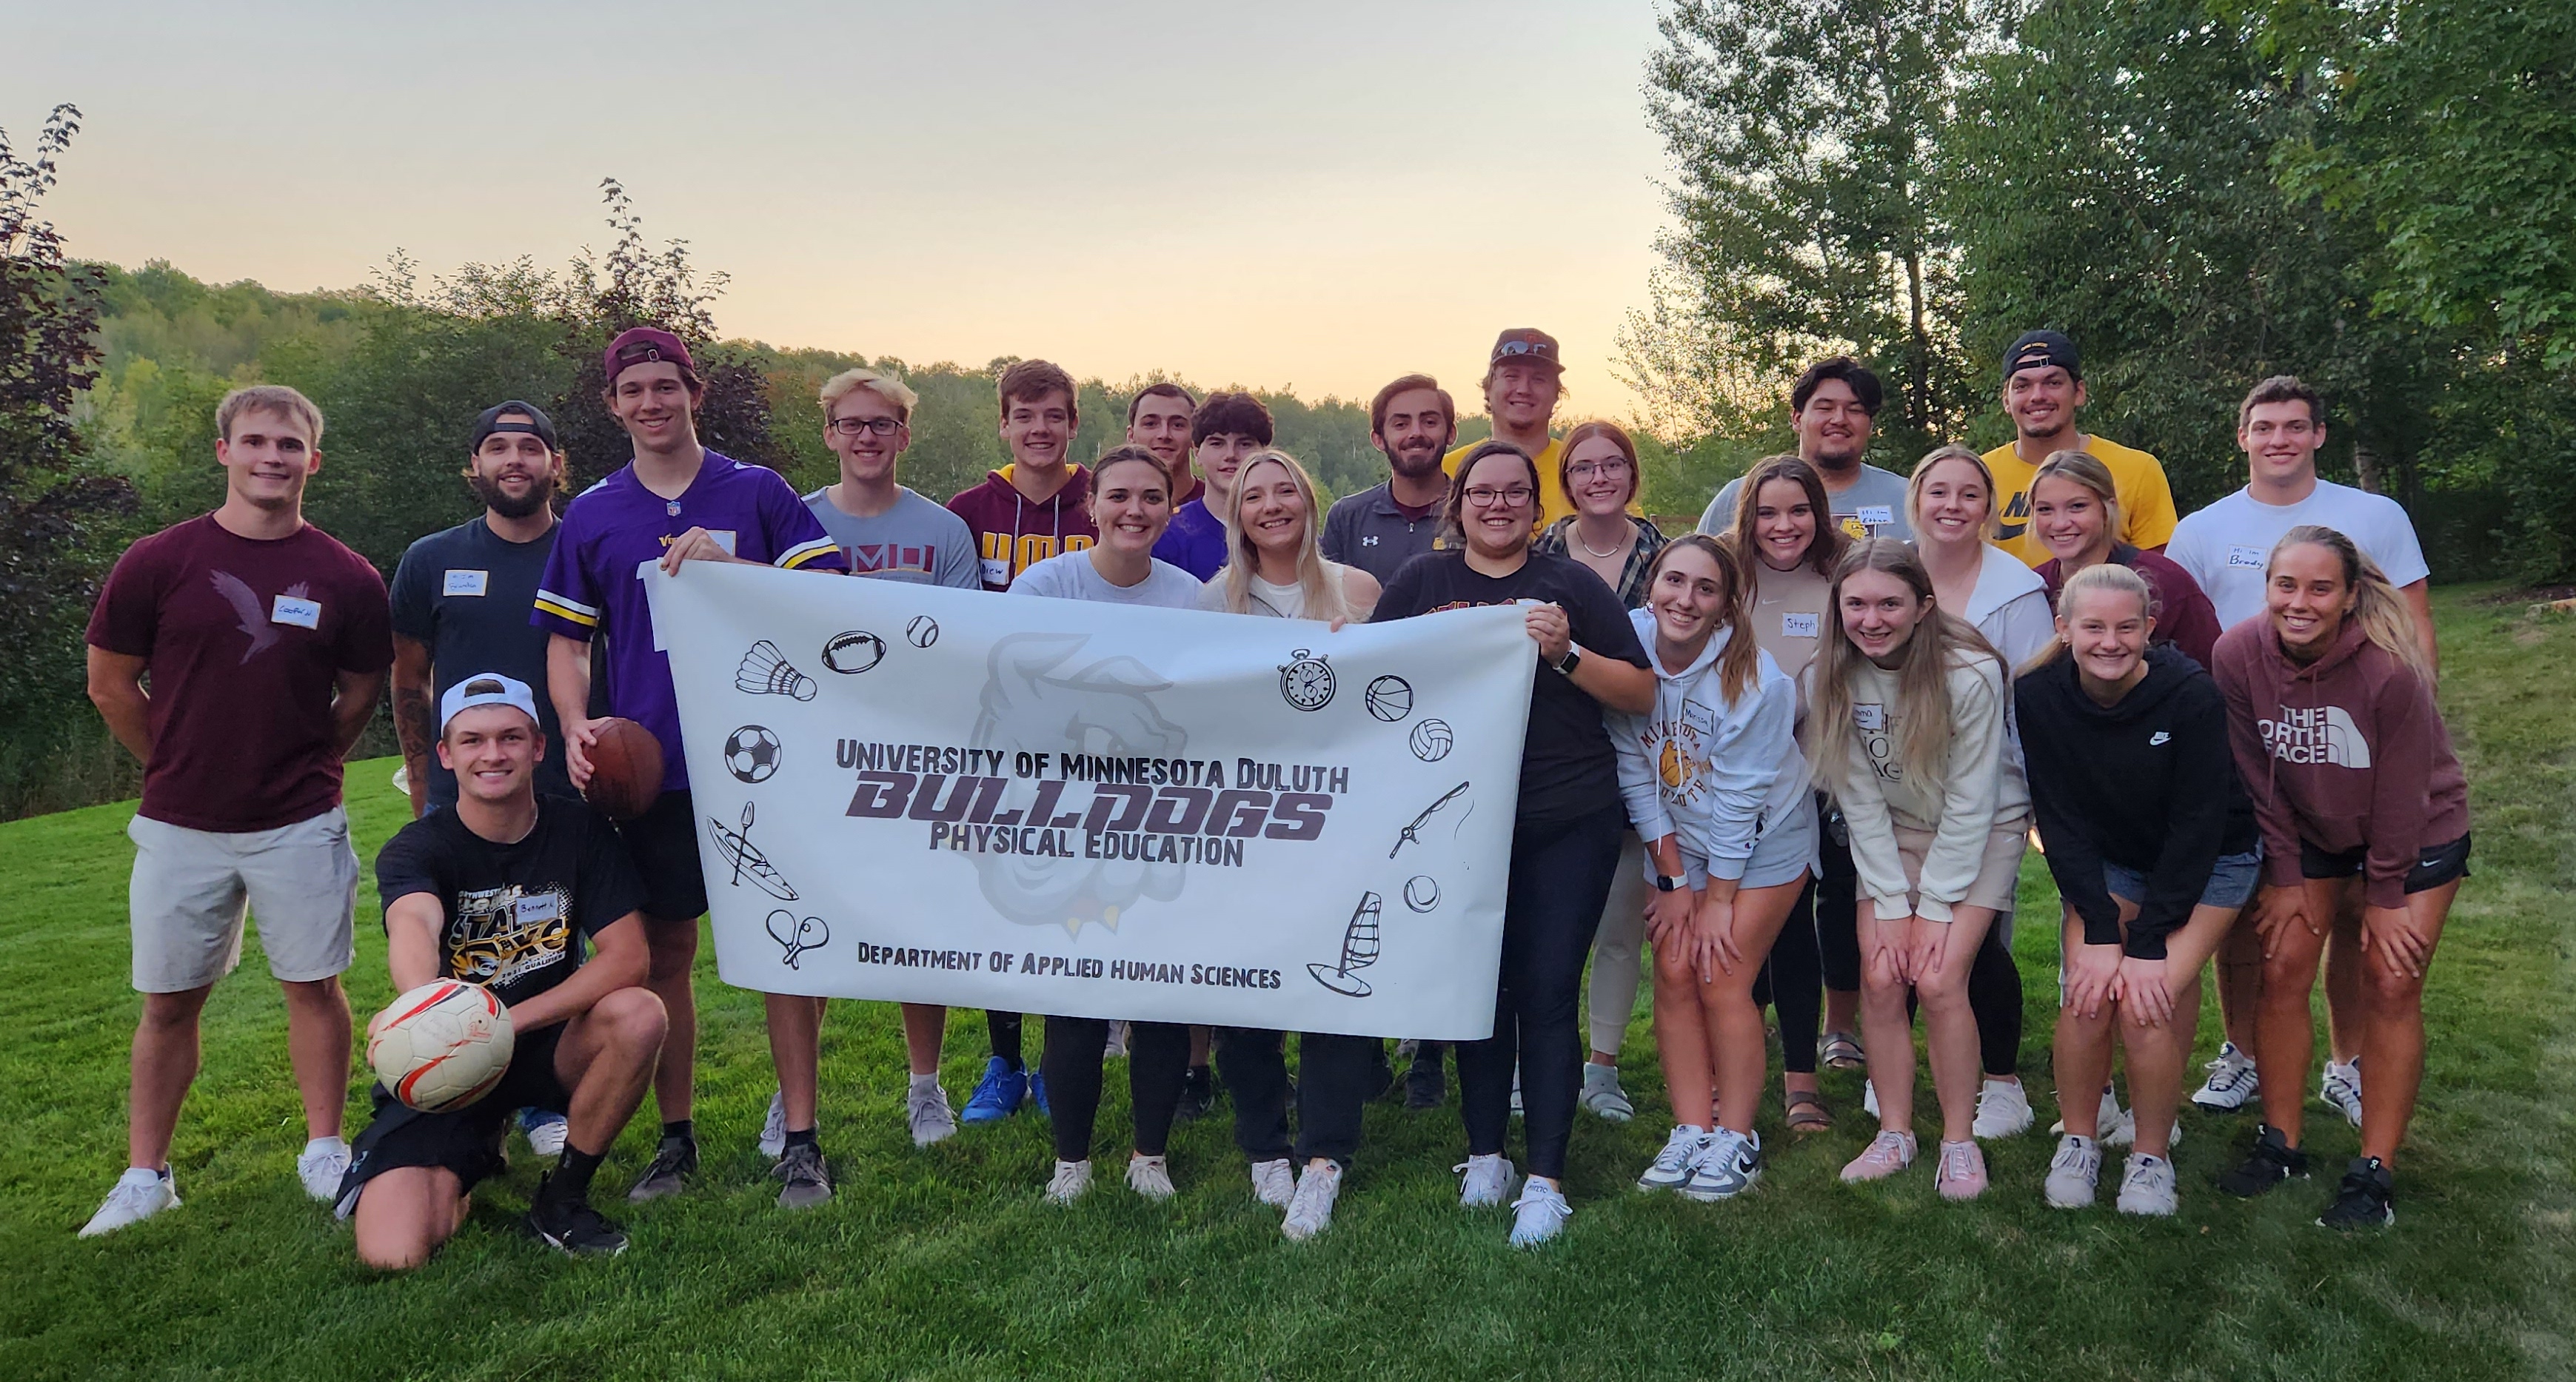 24 college students smiling and posing while holding a sign that reads University of Minnesota Duluth Bulldogs Physical Education